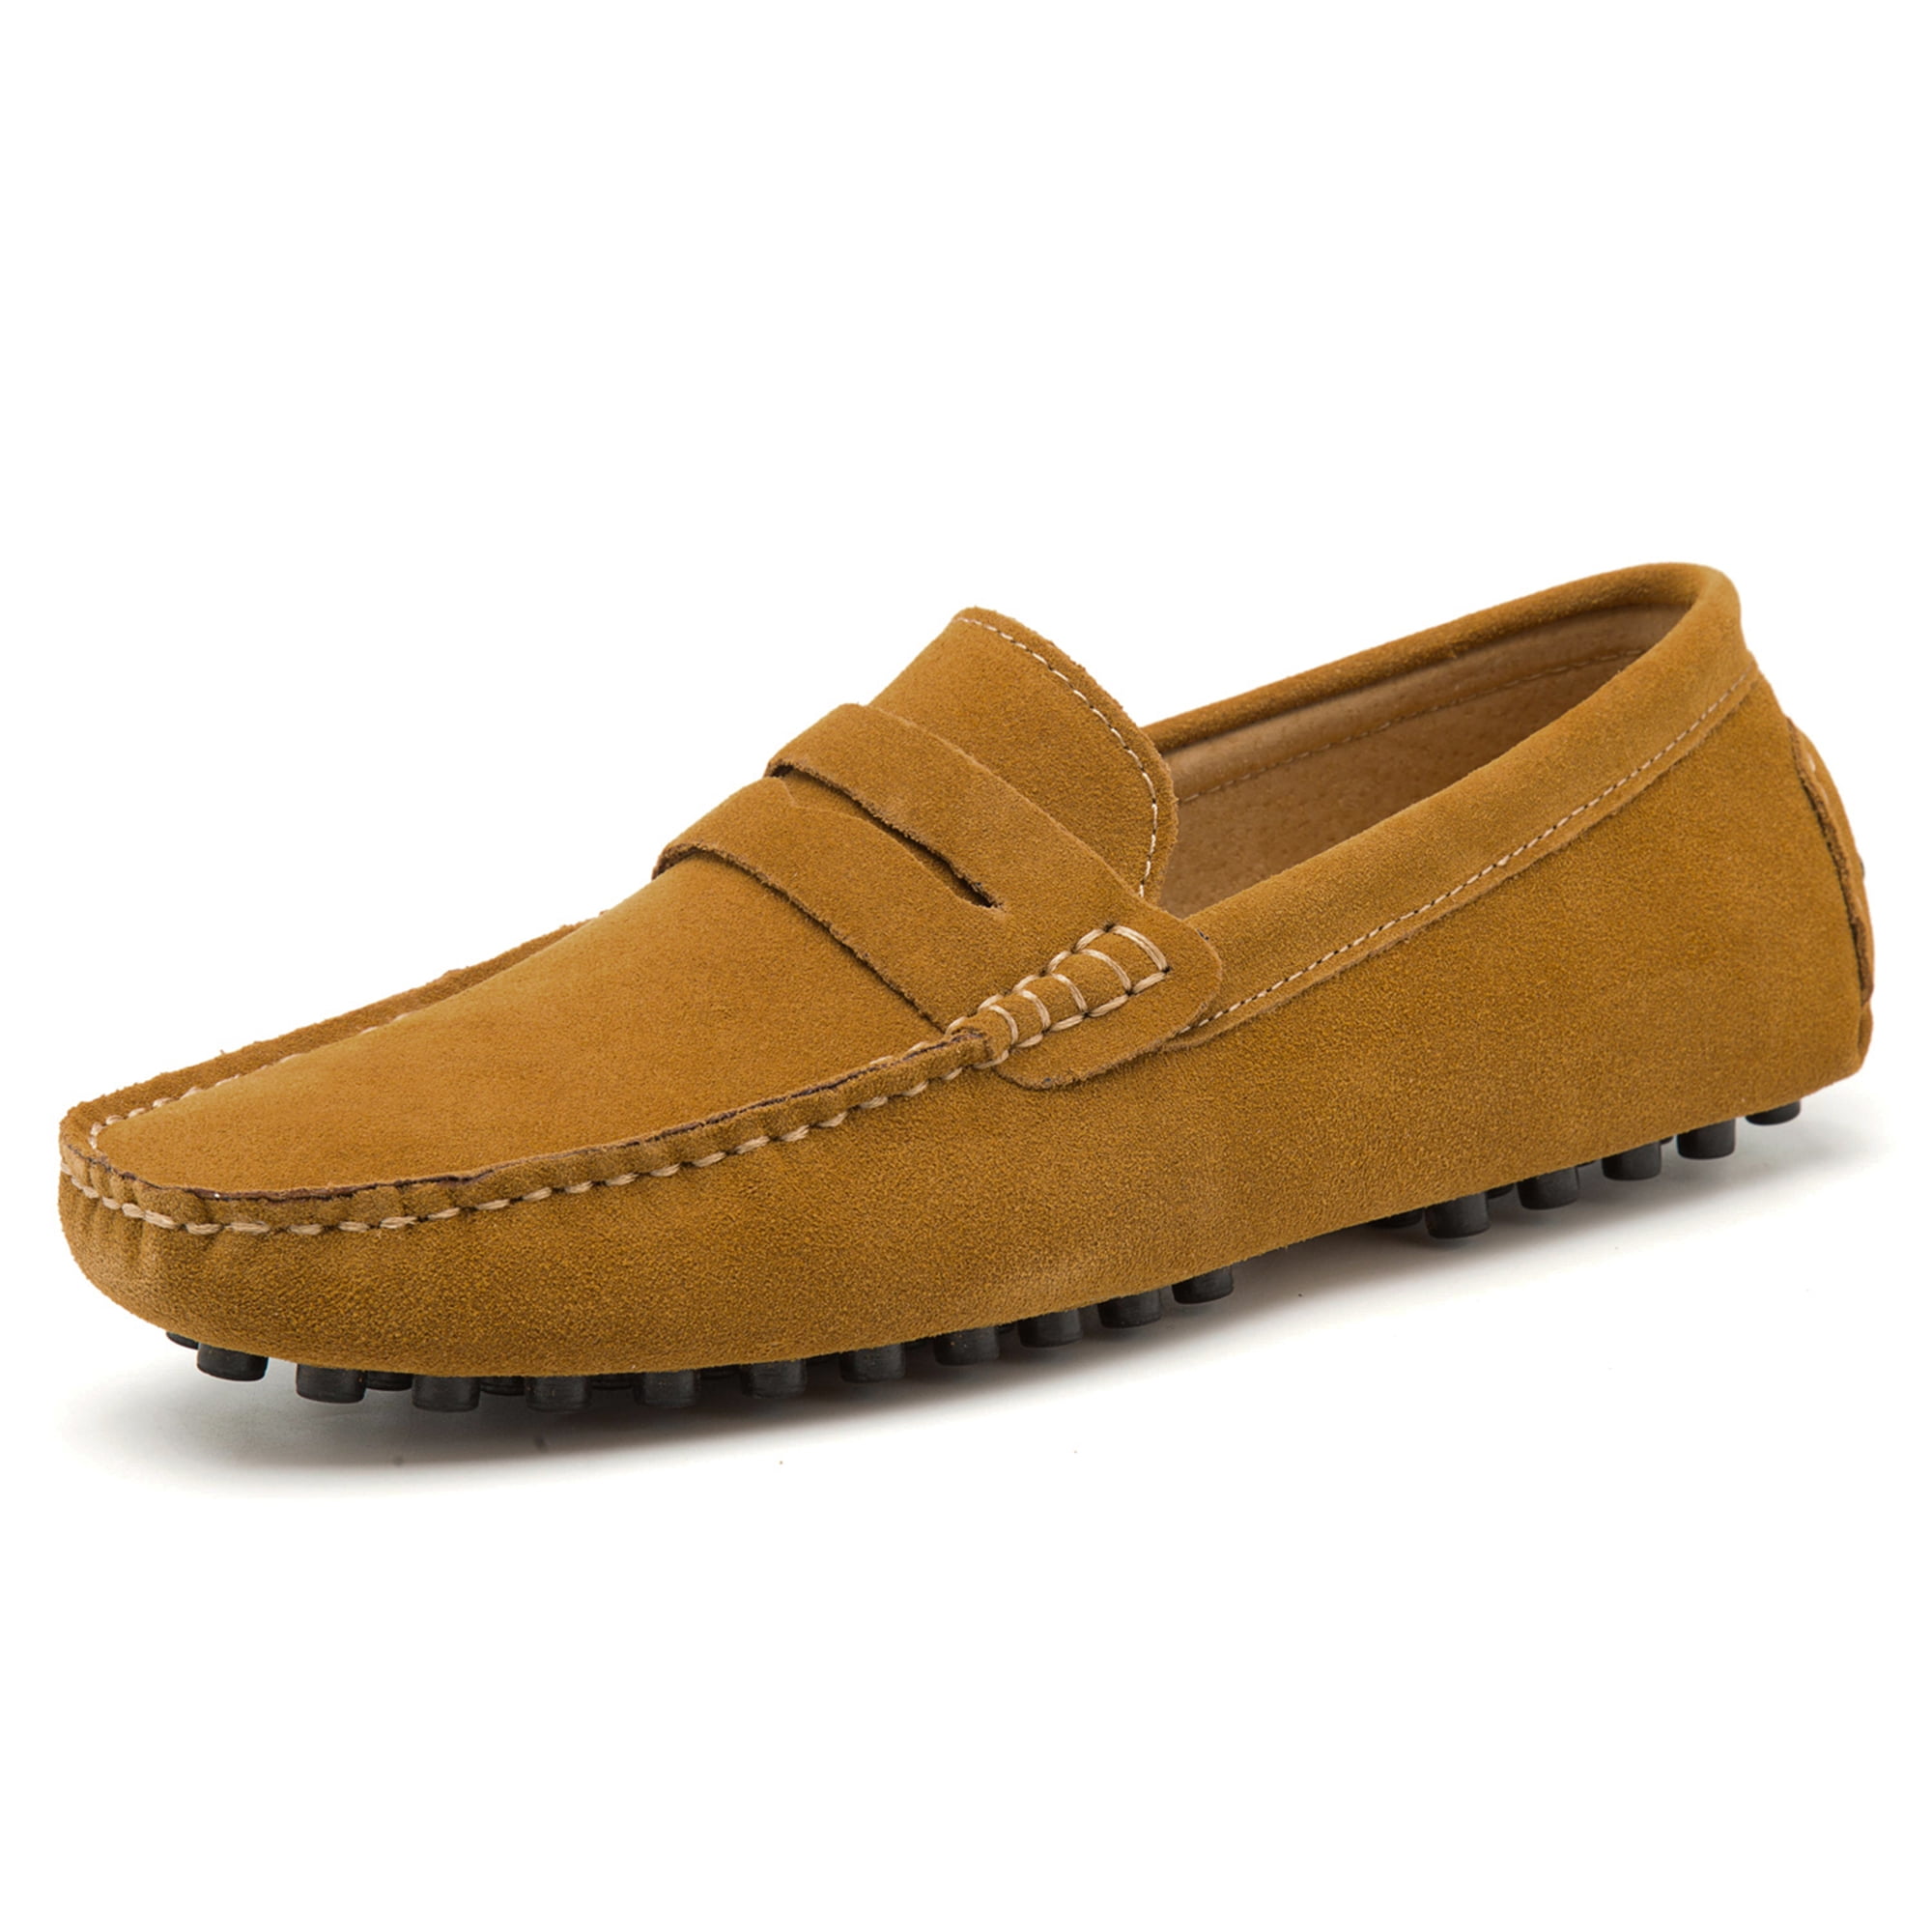 Men's Slip-On Suede Loafers with Logo Detail